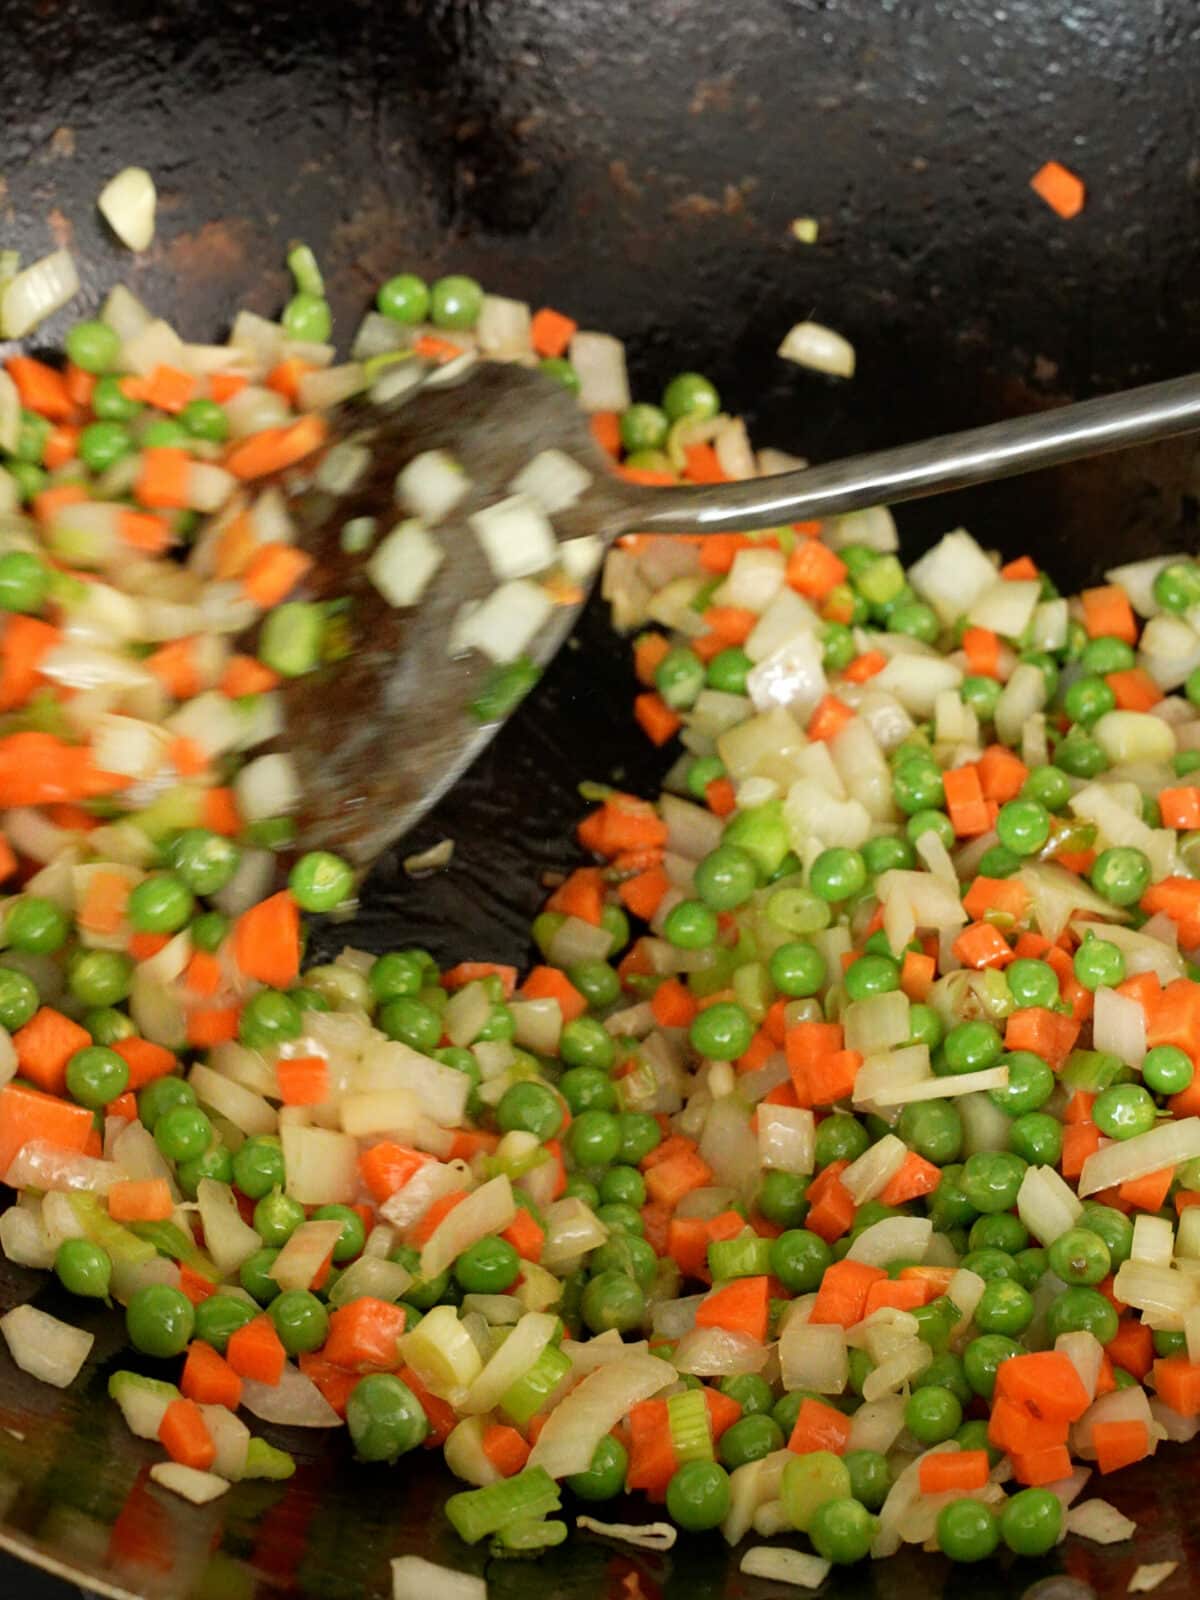 Onions, carrots, peas, and garlic cooking in a wok.